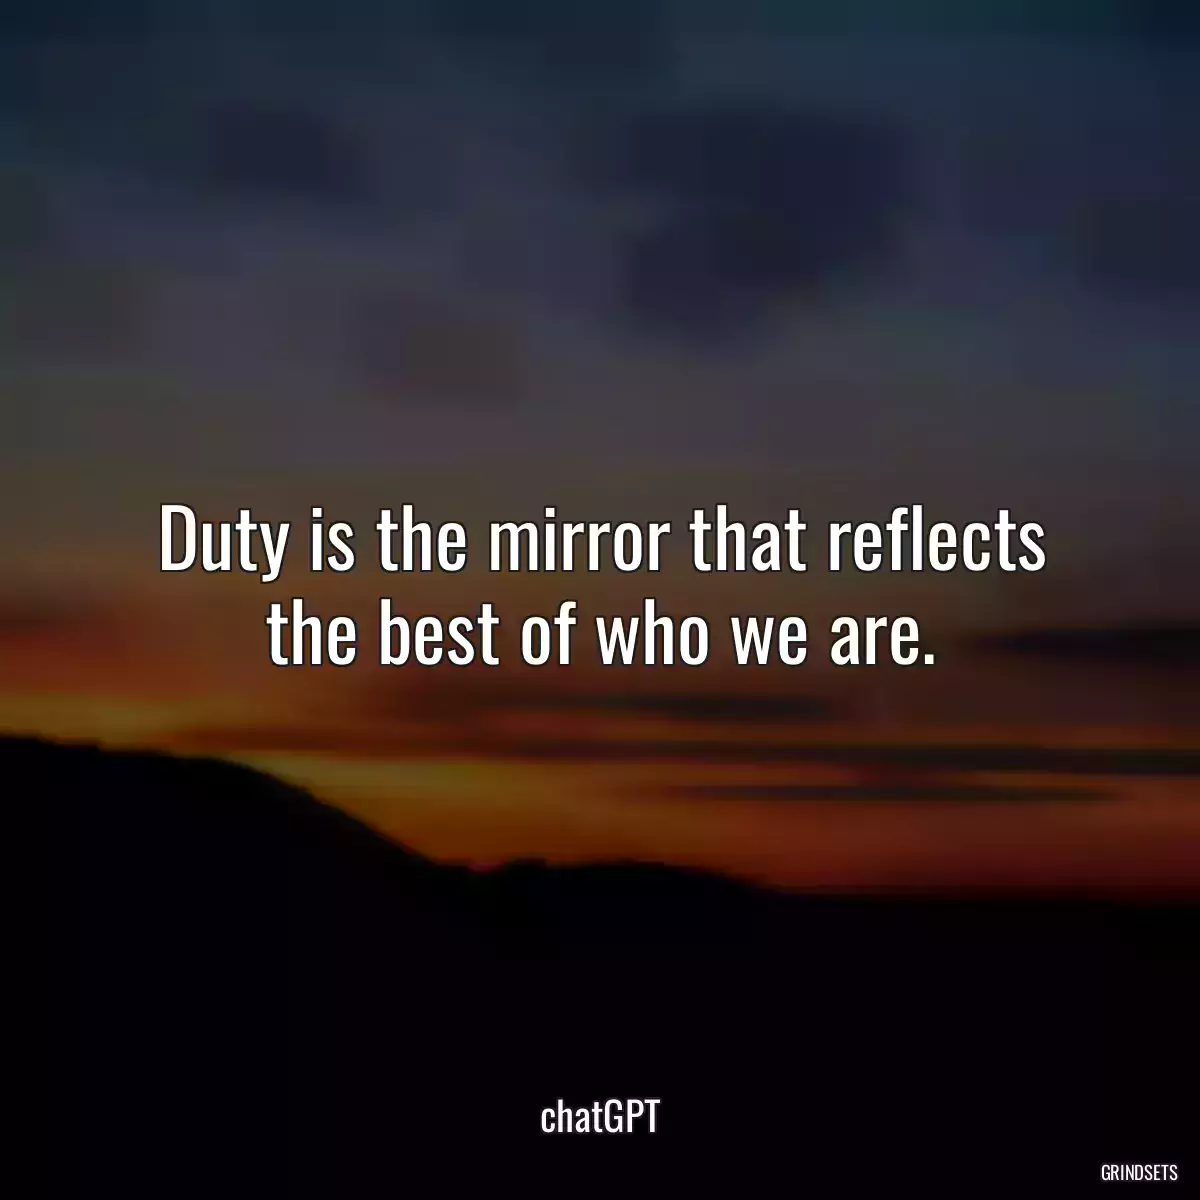 Duty is the mirror that reflects the best of who we are.